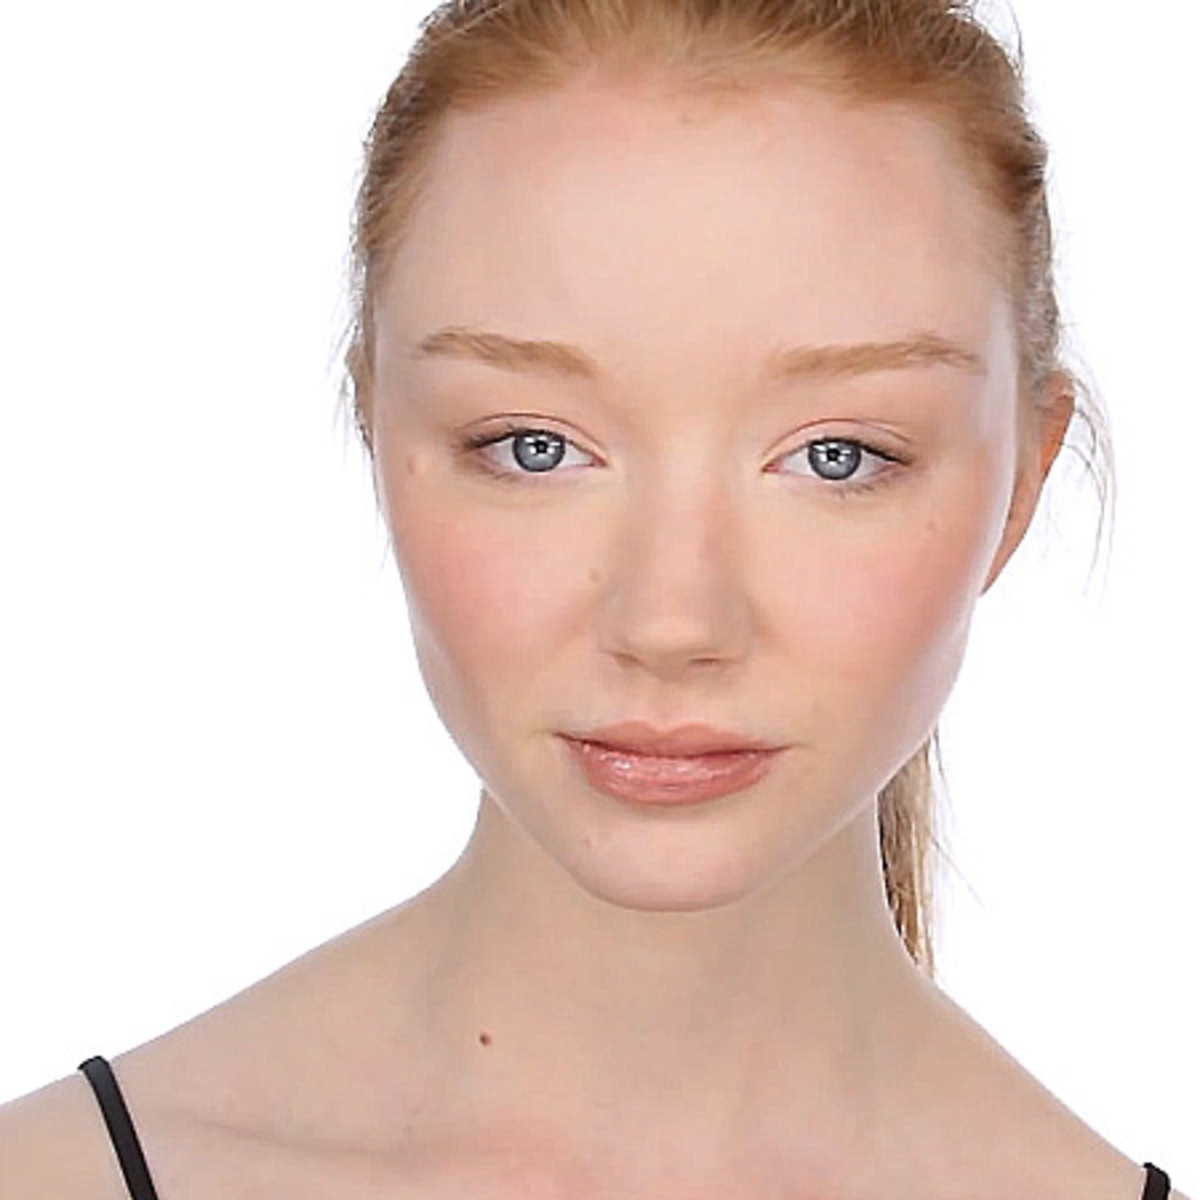 Makeup For Pale Skin Brown Eyes 25 Natural Makeup Look For Fair Skin Pale Skin Beauty Photos